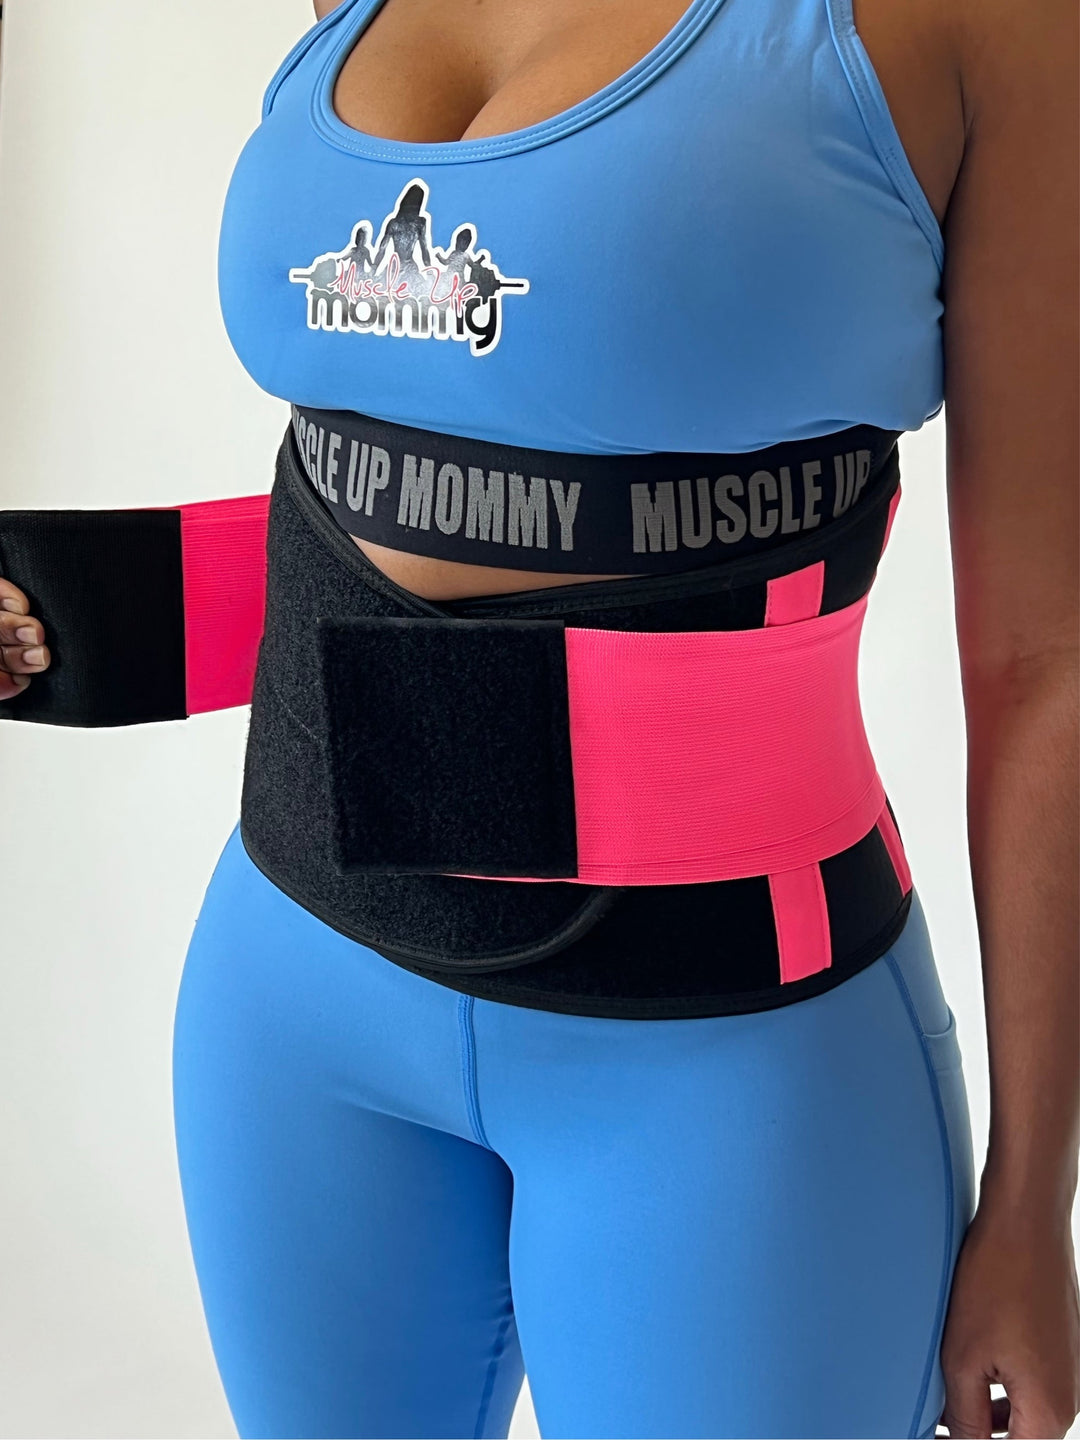 Muscle Up Mommy® Postpartum Belly Binder Belt, C-Section Recovery